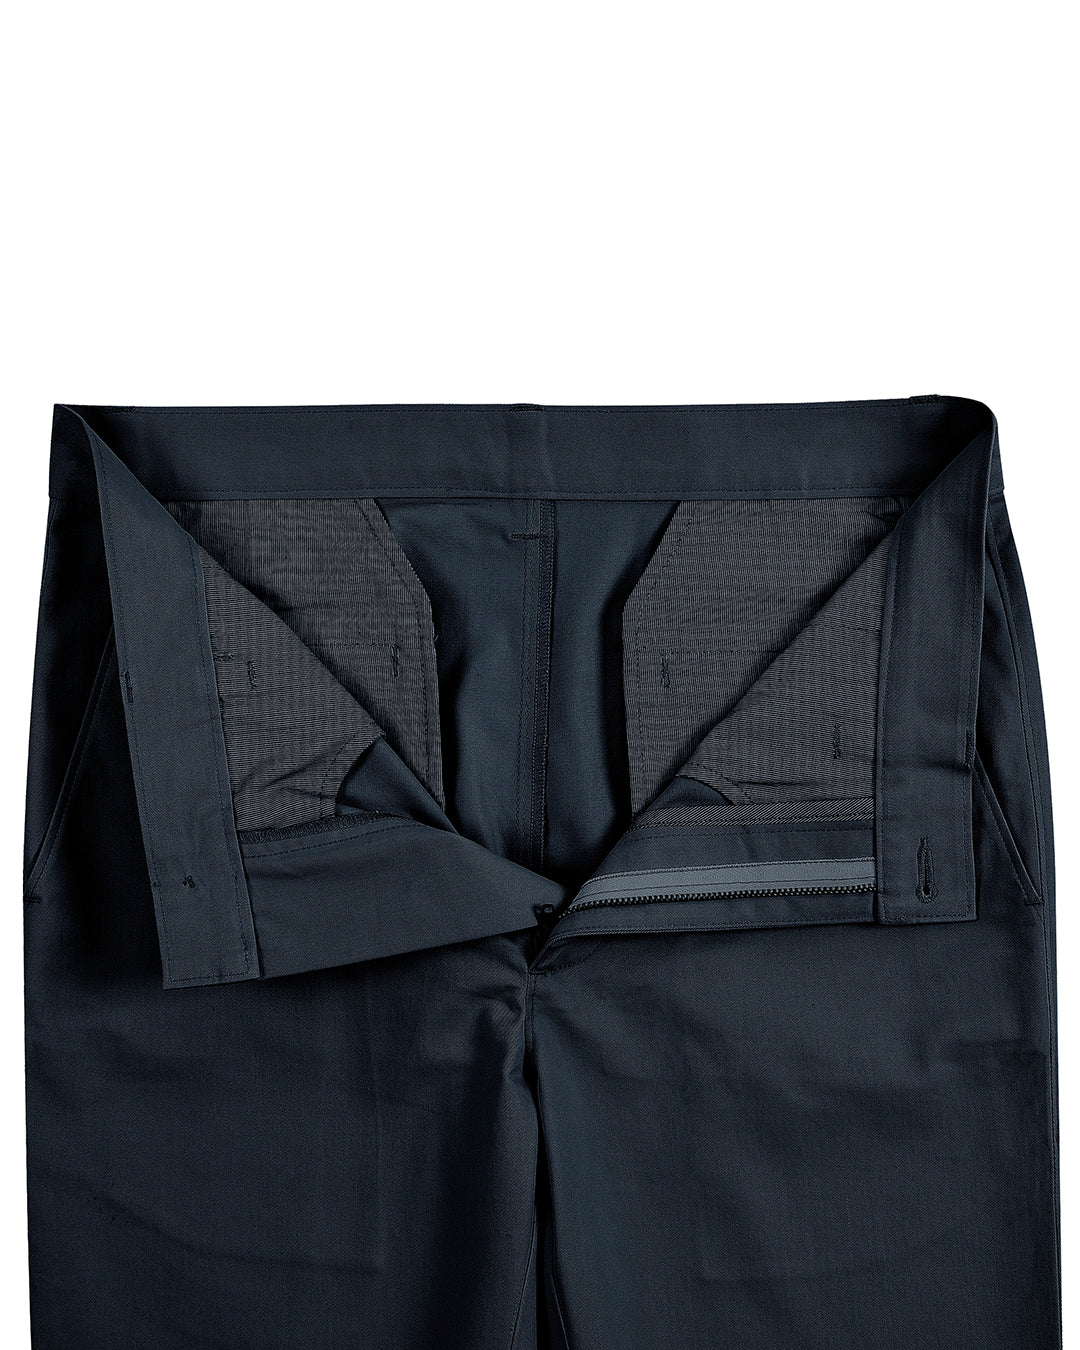 Open front view of custom Genoa Chino pants for men by Luxire in dark teal blue